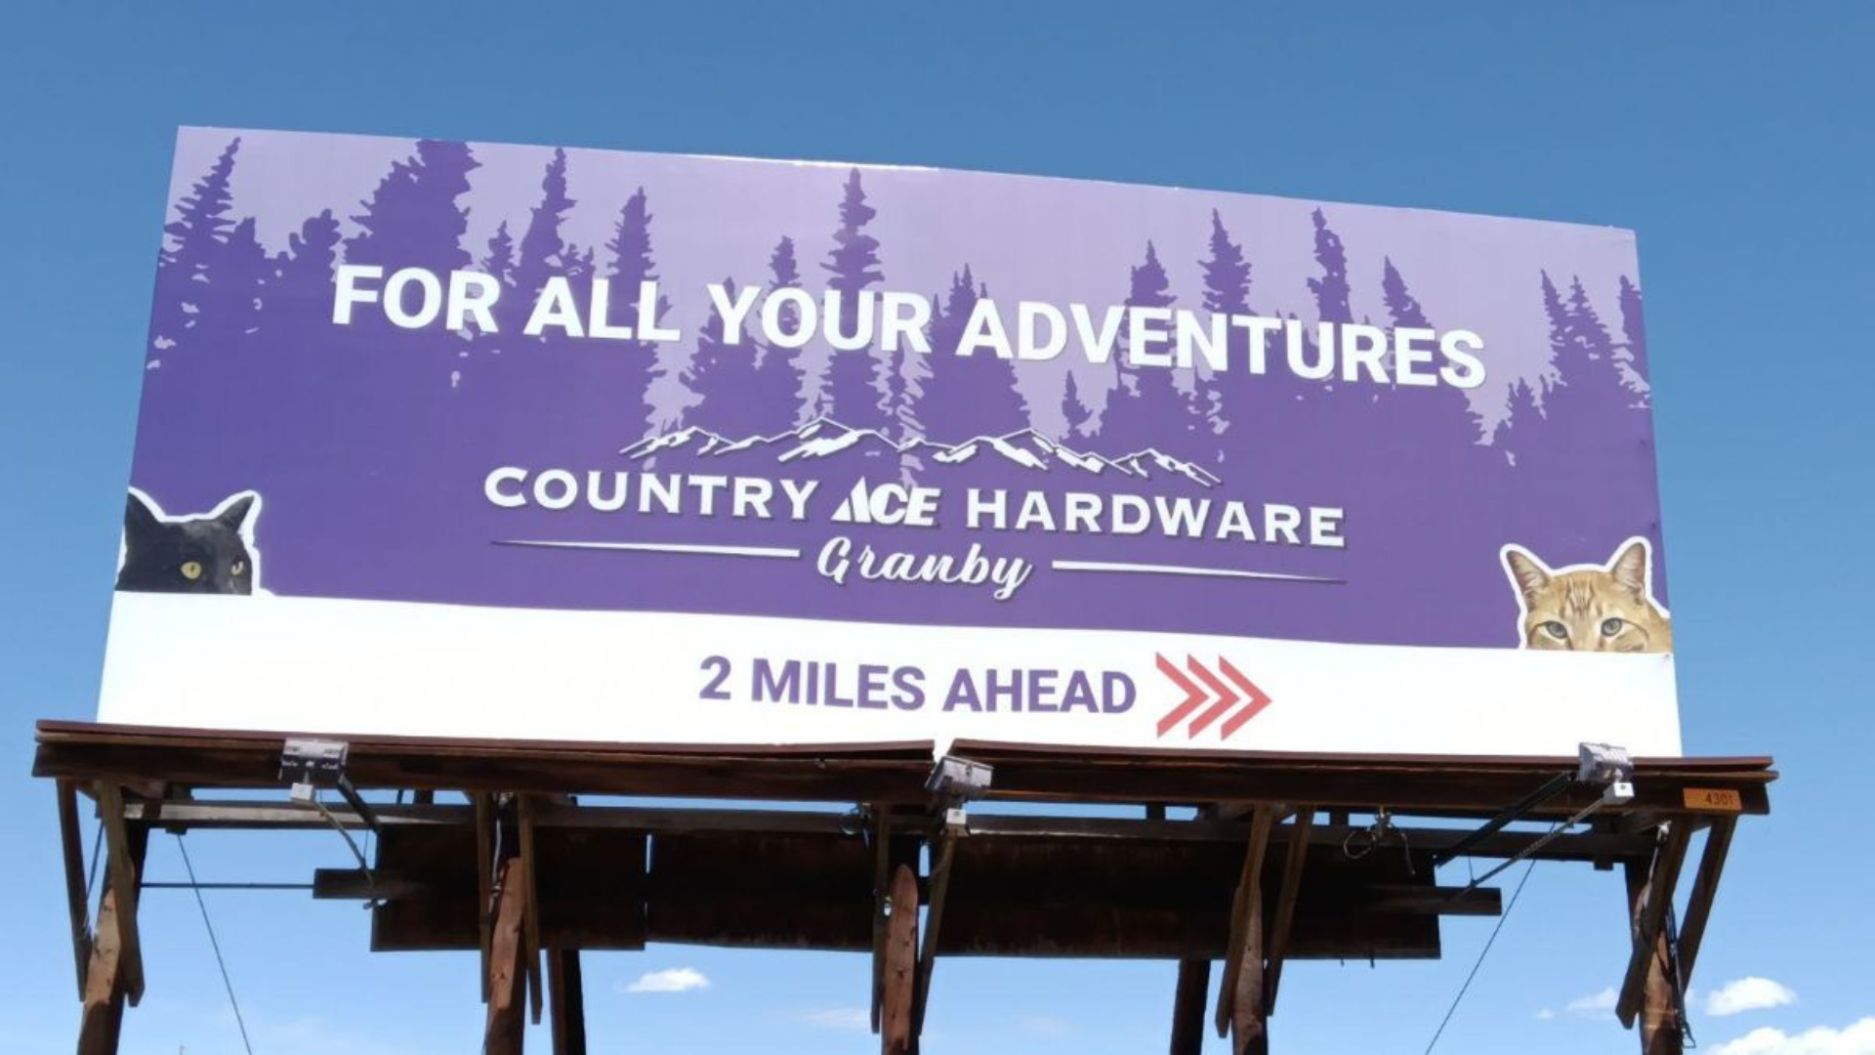 Purple Country Ace Billboard saying "For all your adventures, 2 miles away" with cats peeking out of the corner